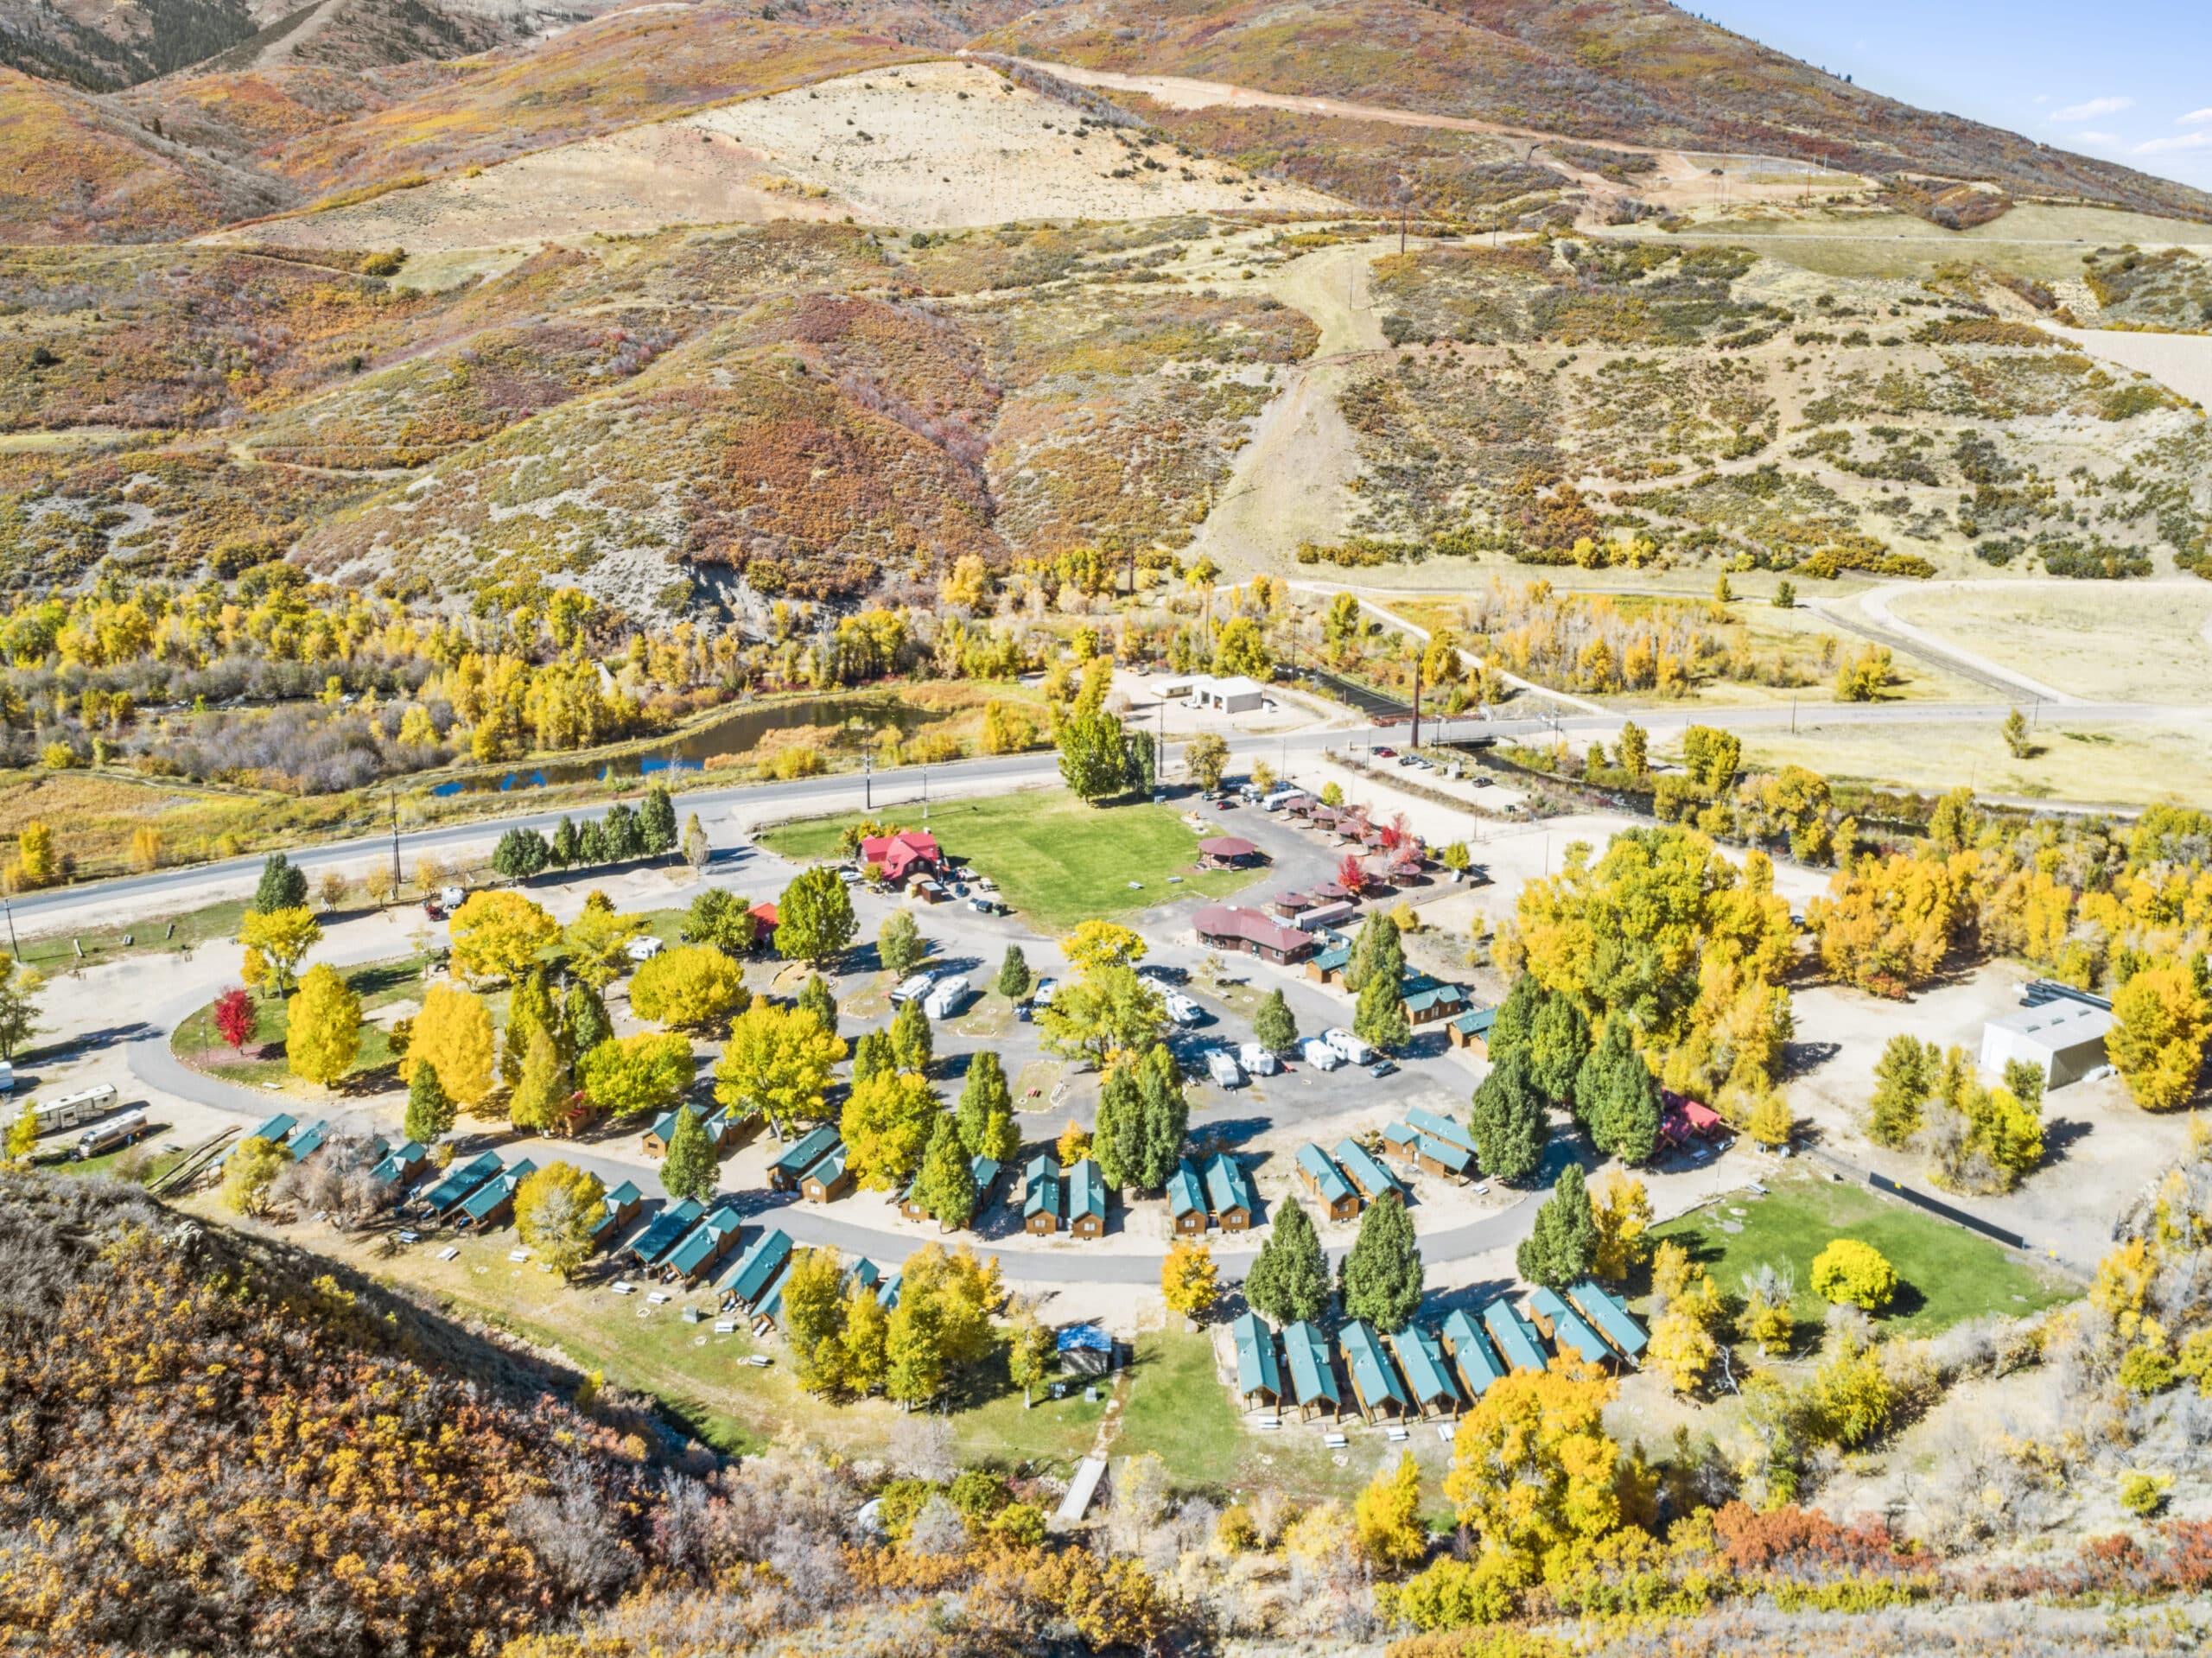 Aerial view of the Rivers Edge campground at Heber Valley, UT